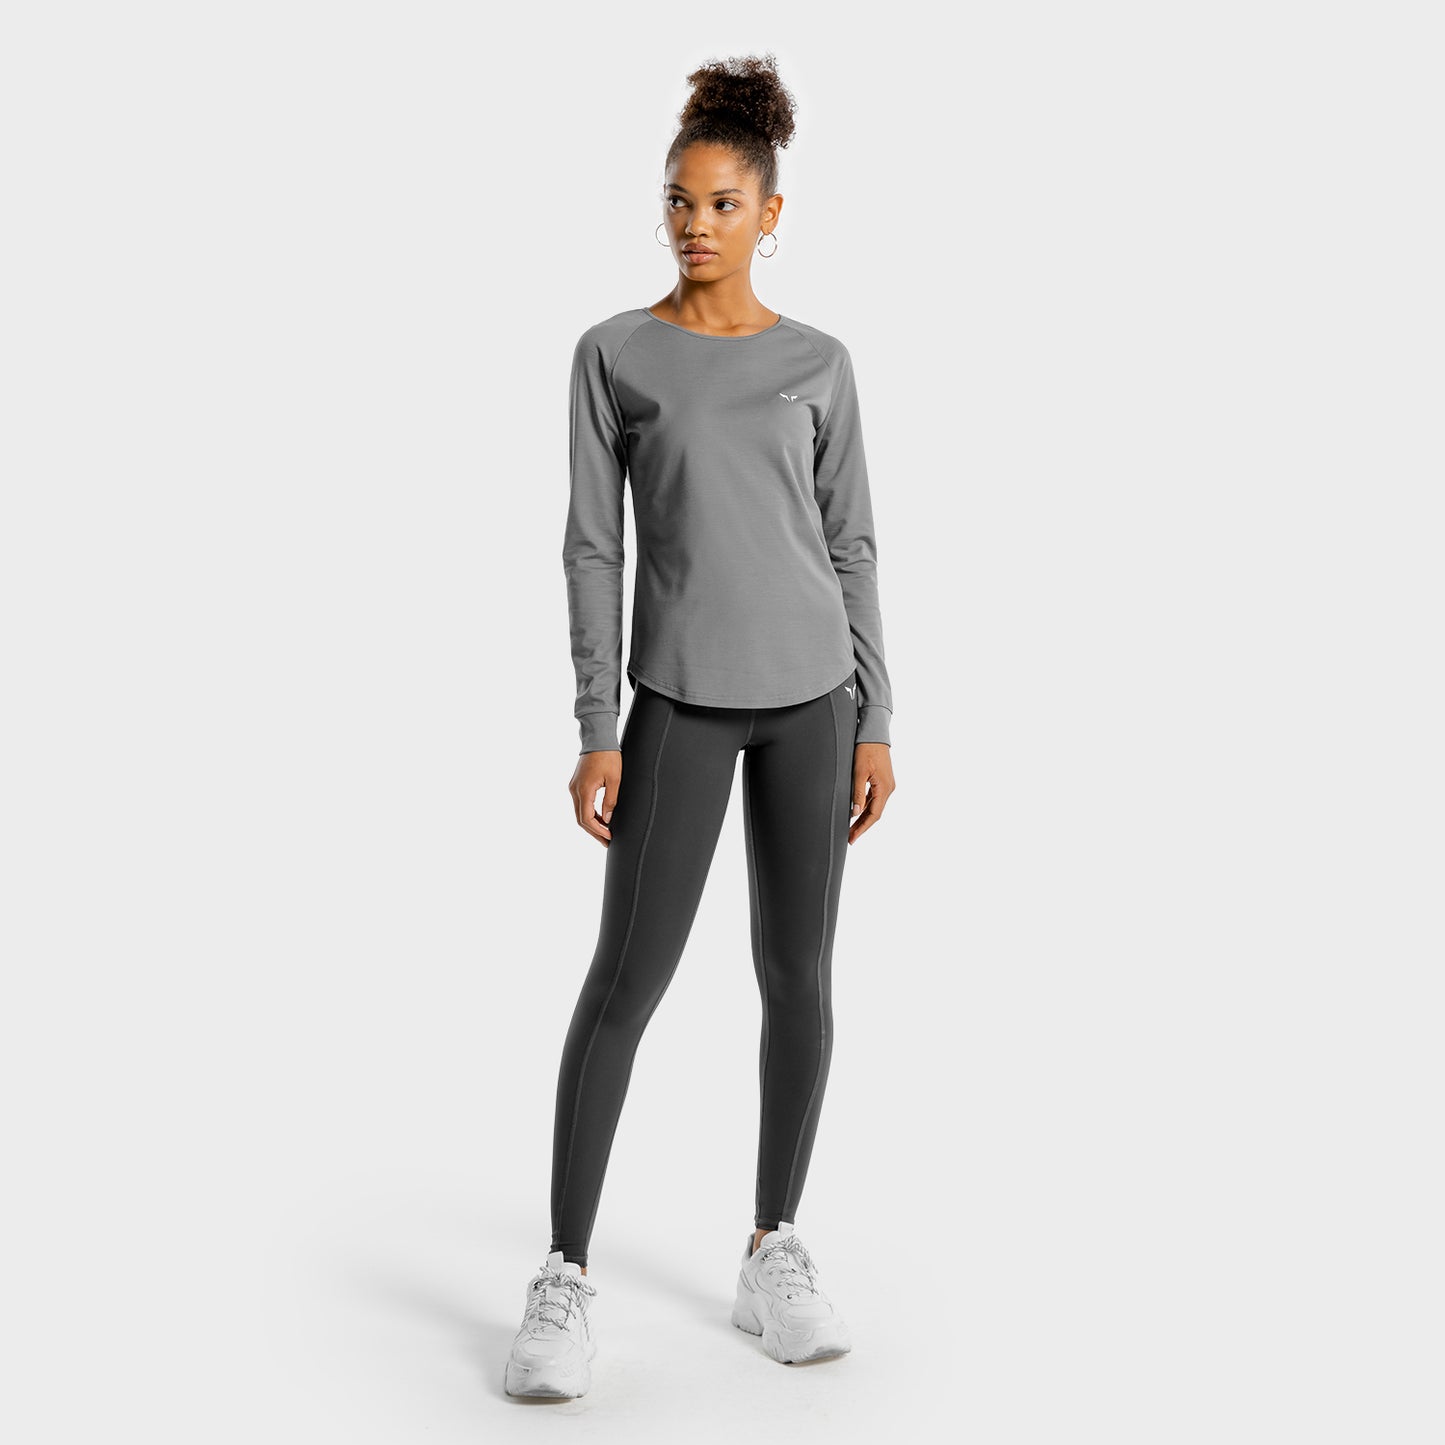 squatwolf-gym-t-shirts-for-women-noor-tee-grey-workout-clothes